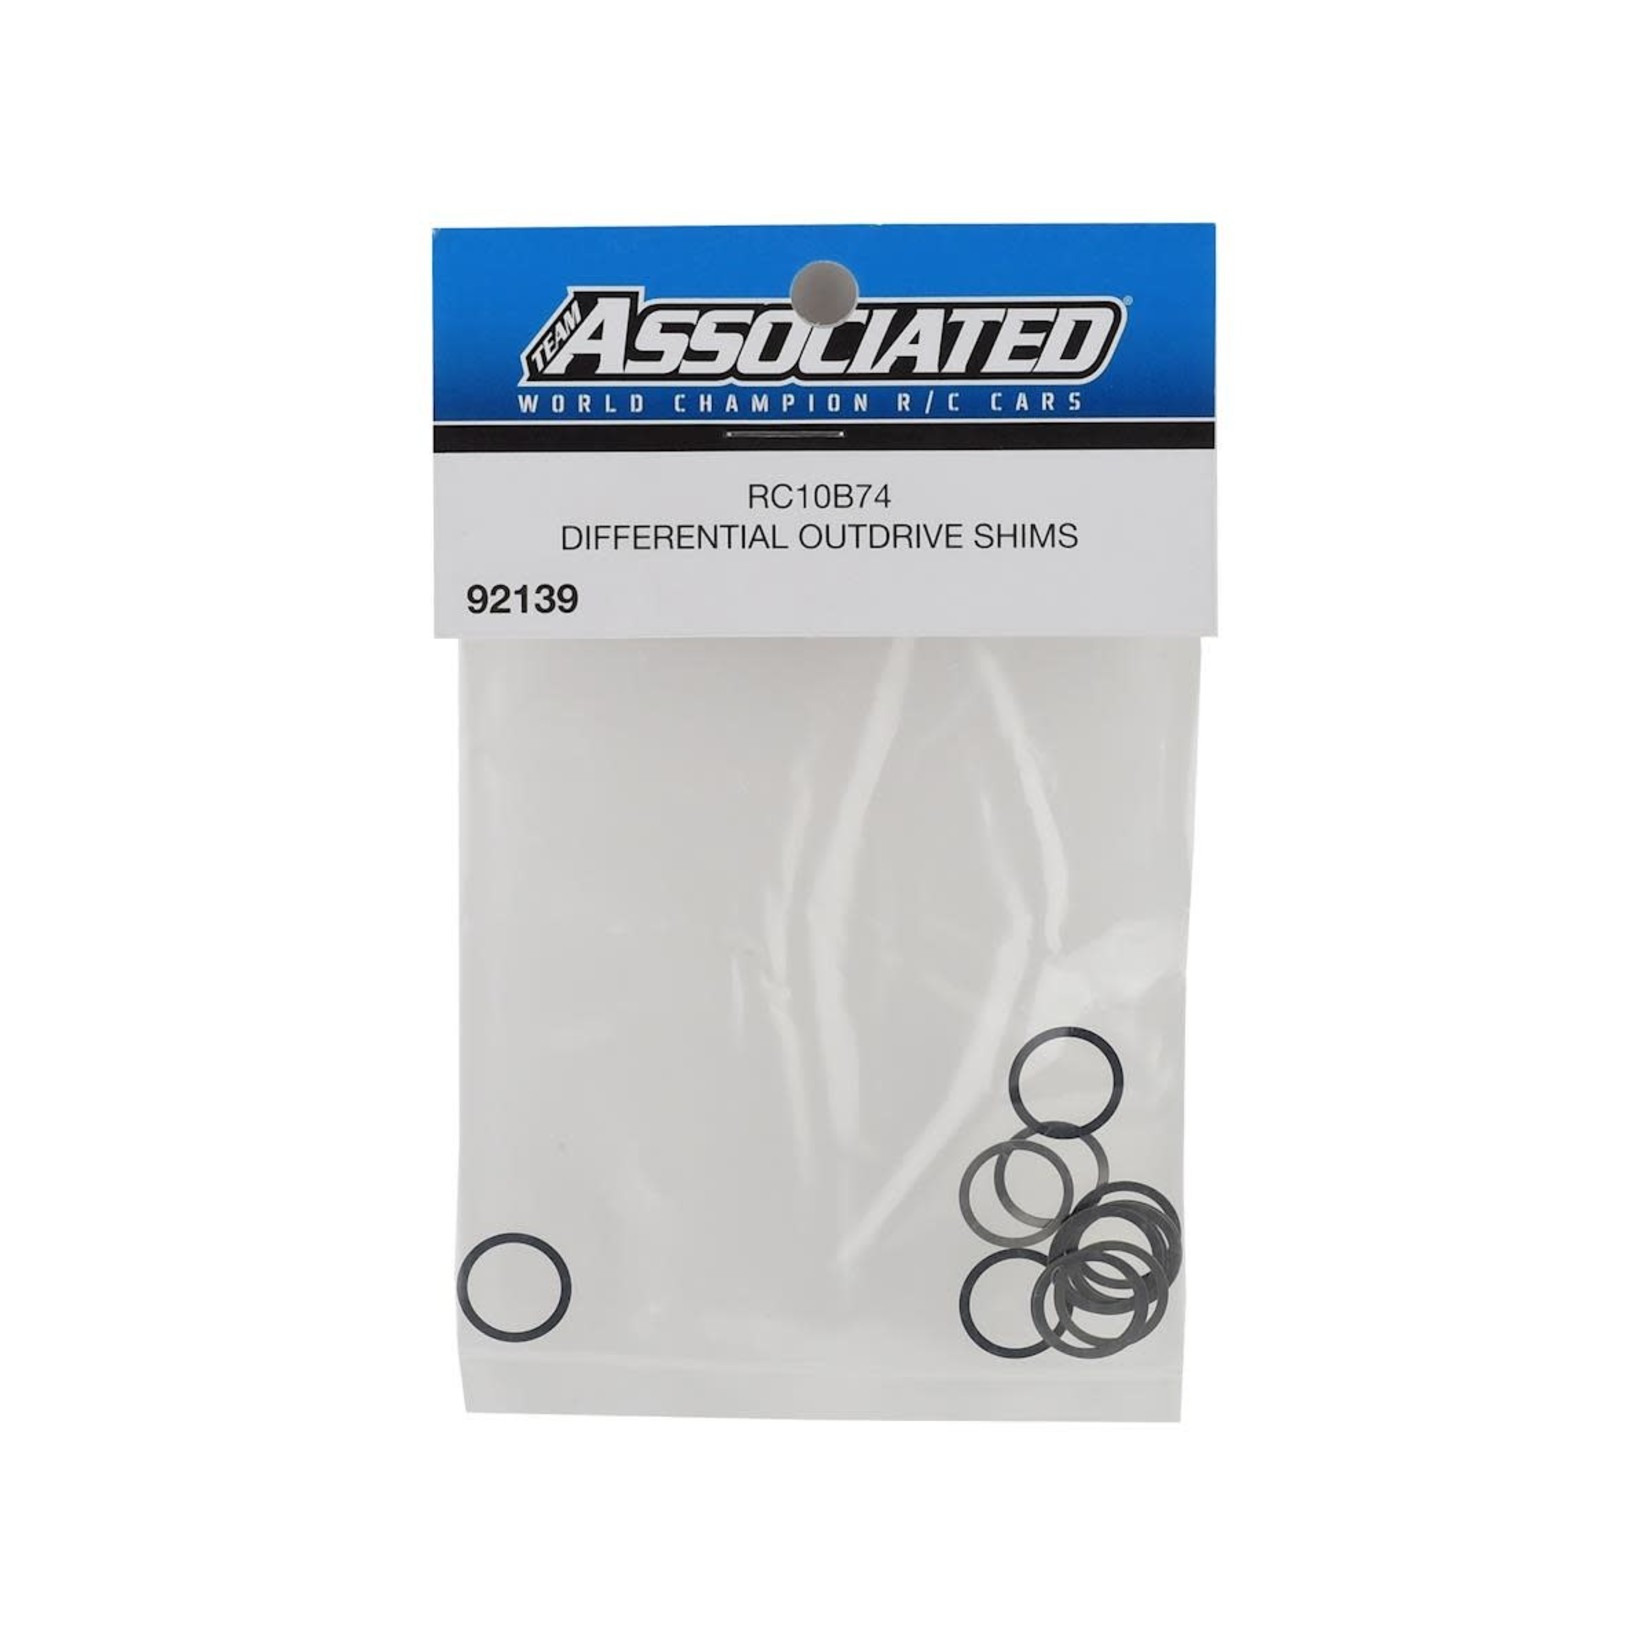 Team Associated Team Associated RC10B74 Differential Outdrive Shims (14) #92139